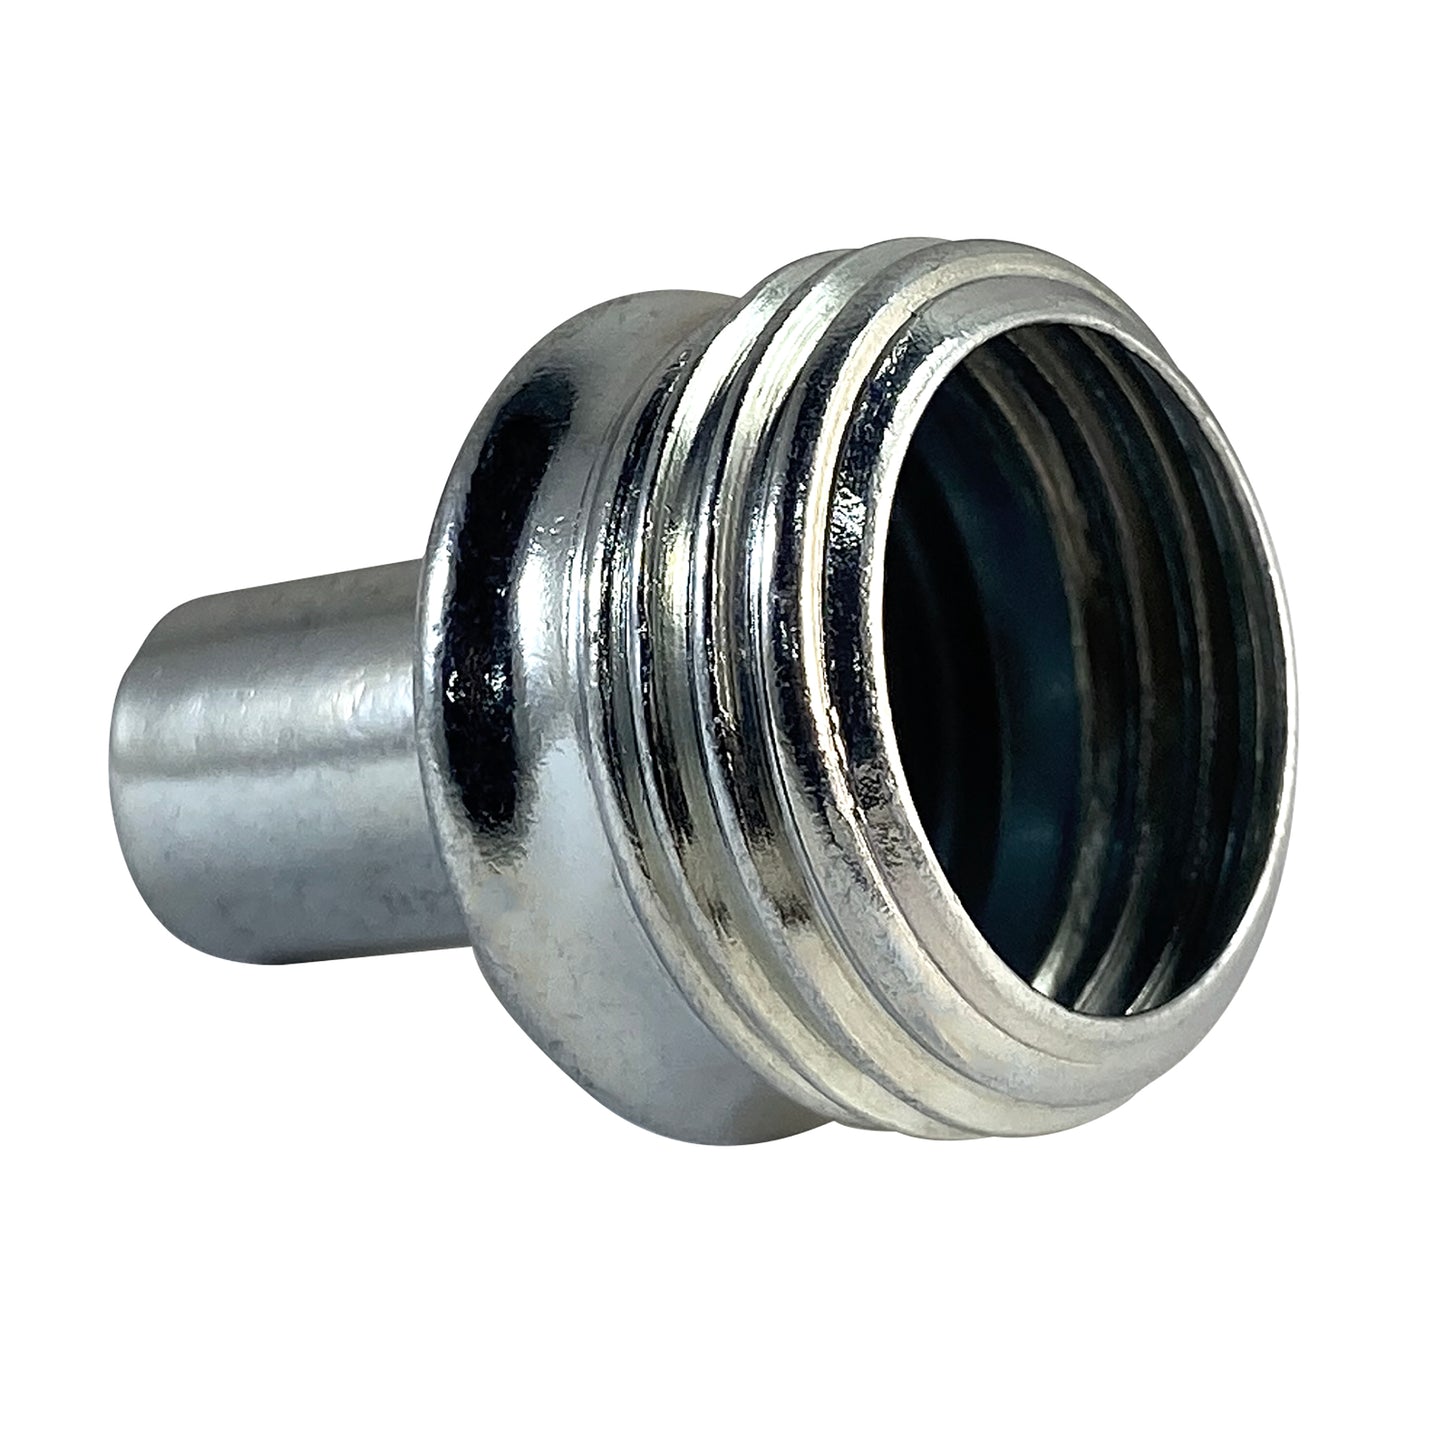 1/2" Expansion Couplings